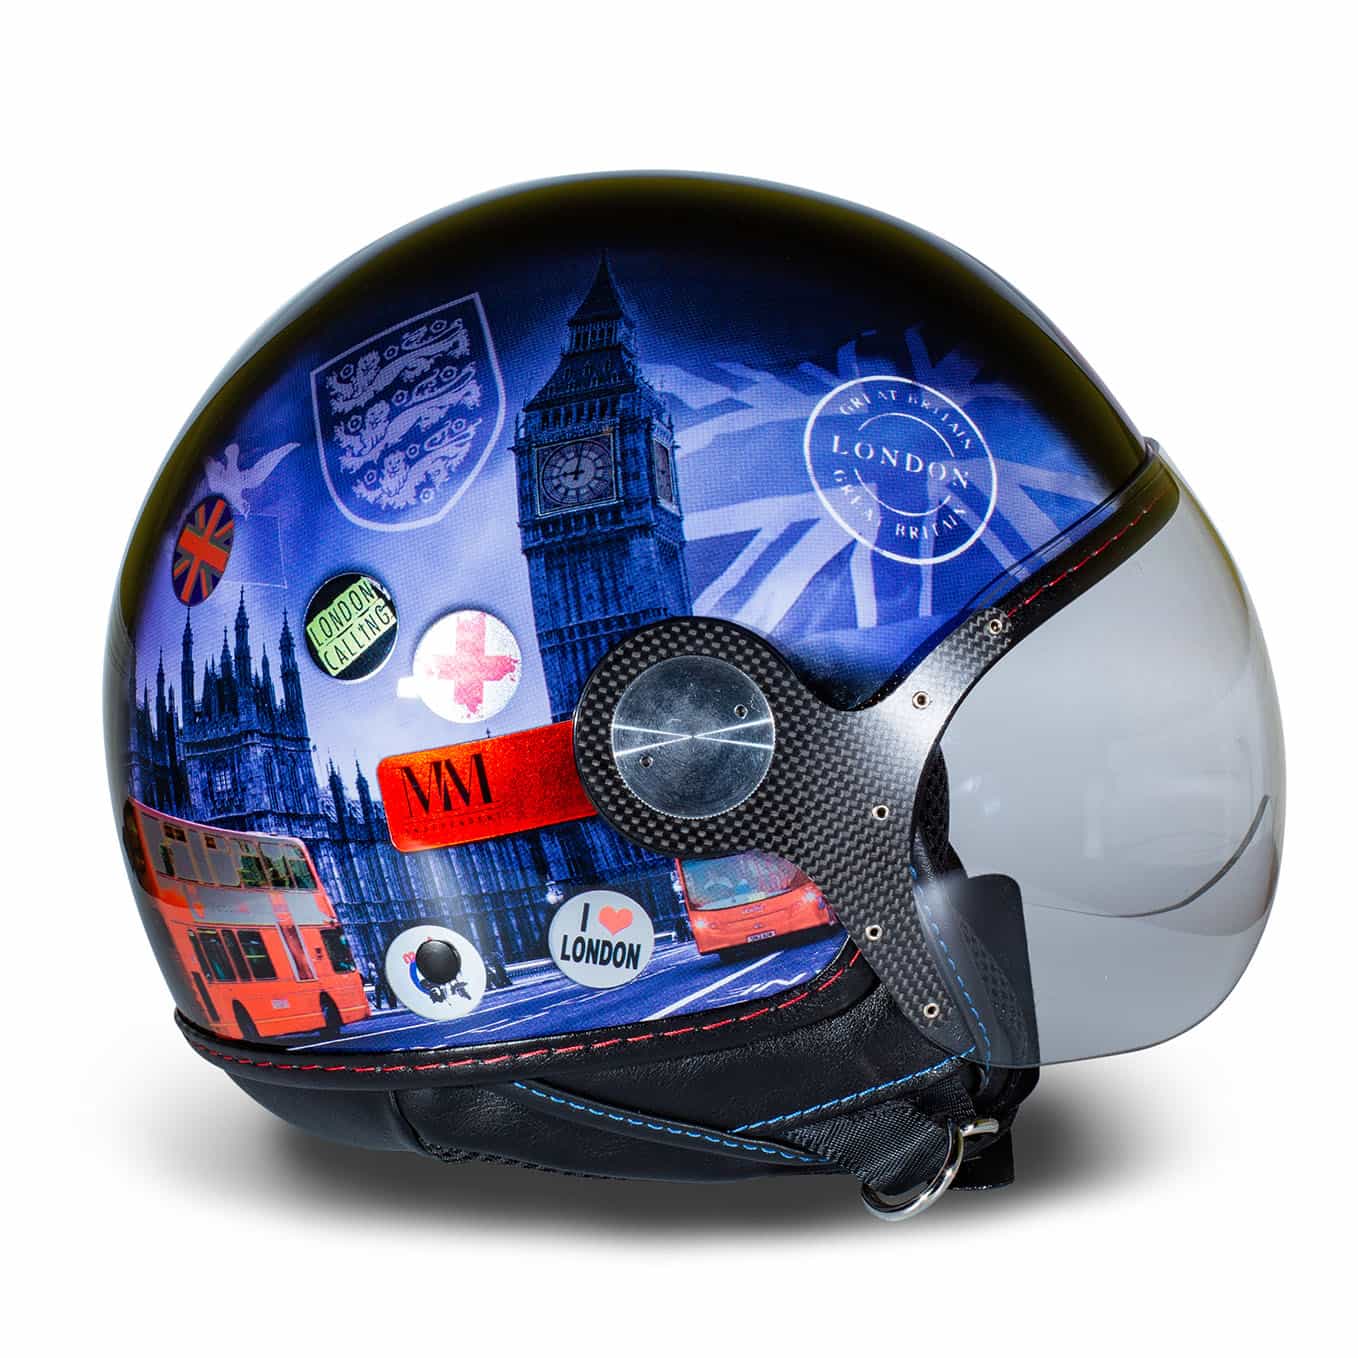 helmet londa mm independent right-hand view